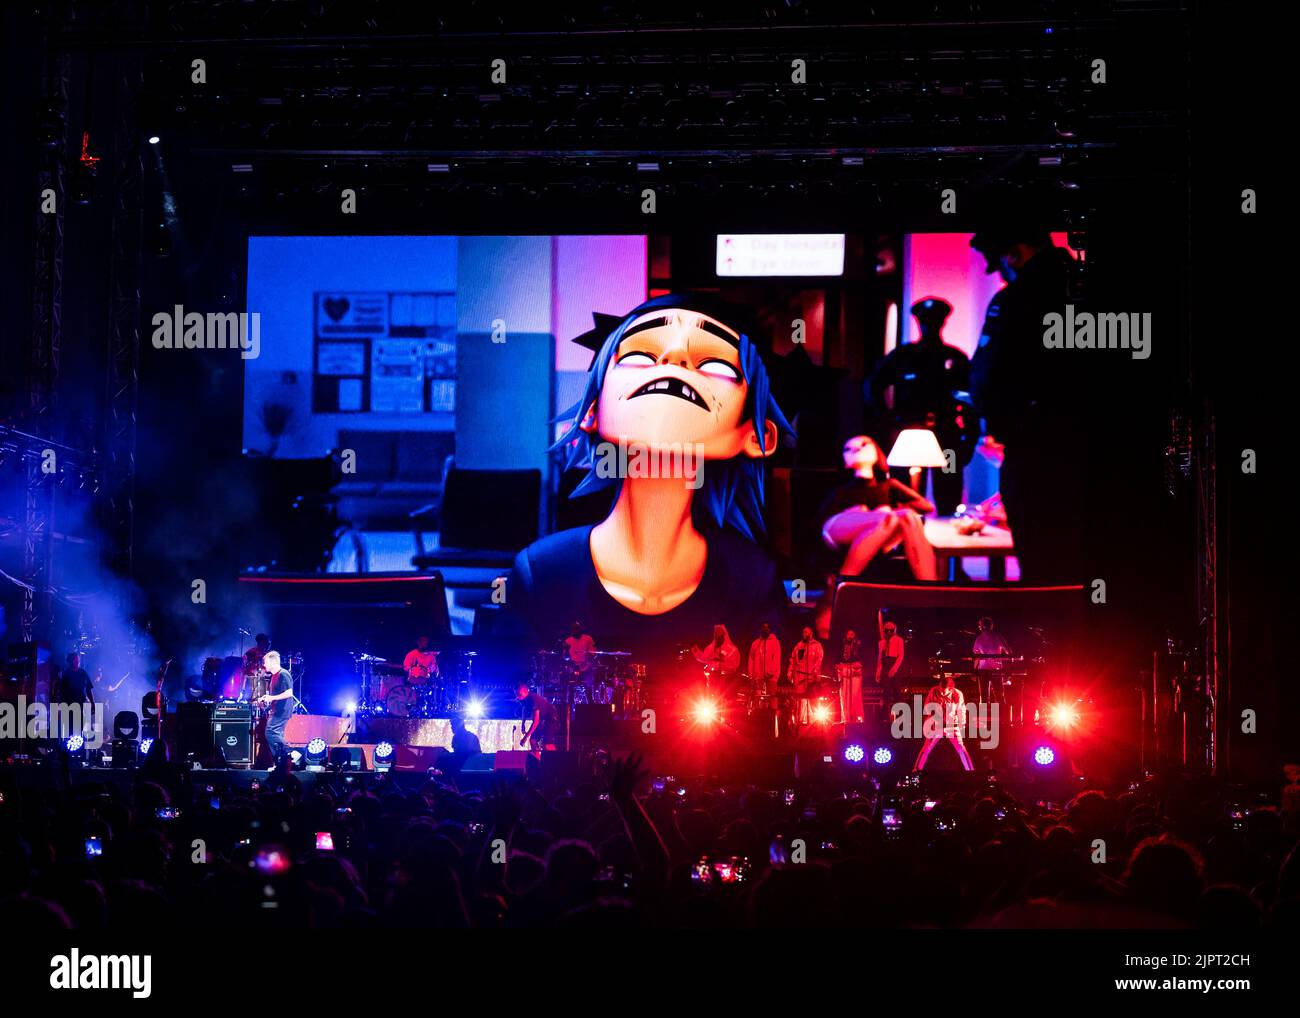 London, UK, Friday, 19th August 2022. Gorillaz perform live on stage as part of the All Points East Festival, Victoria Park, London.  Credit: DavidJensen / Empics Entertainment / Alamy Live News Stock Photo